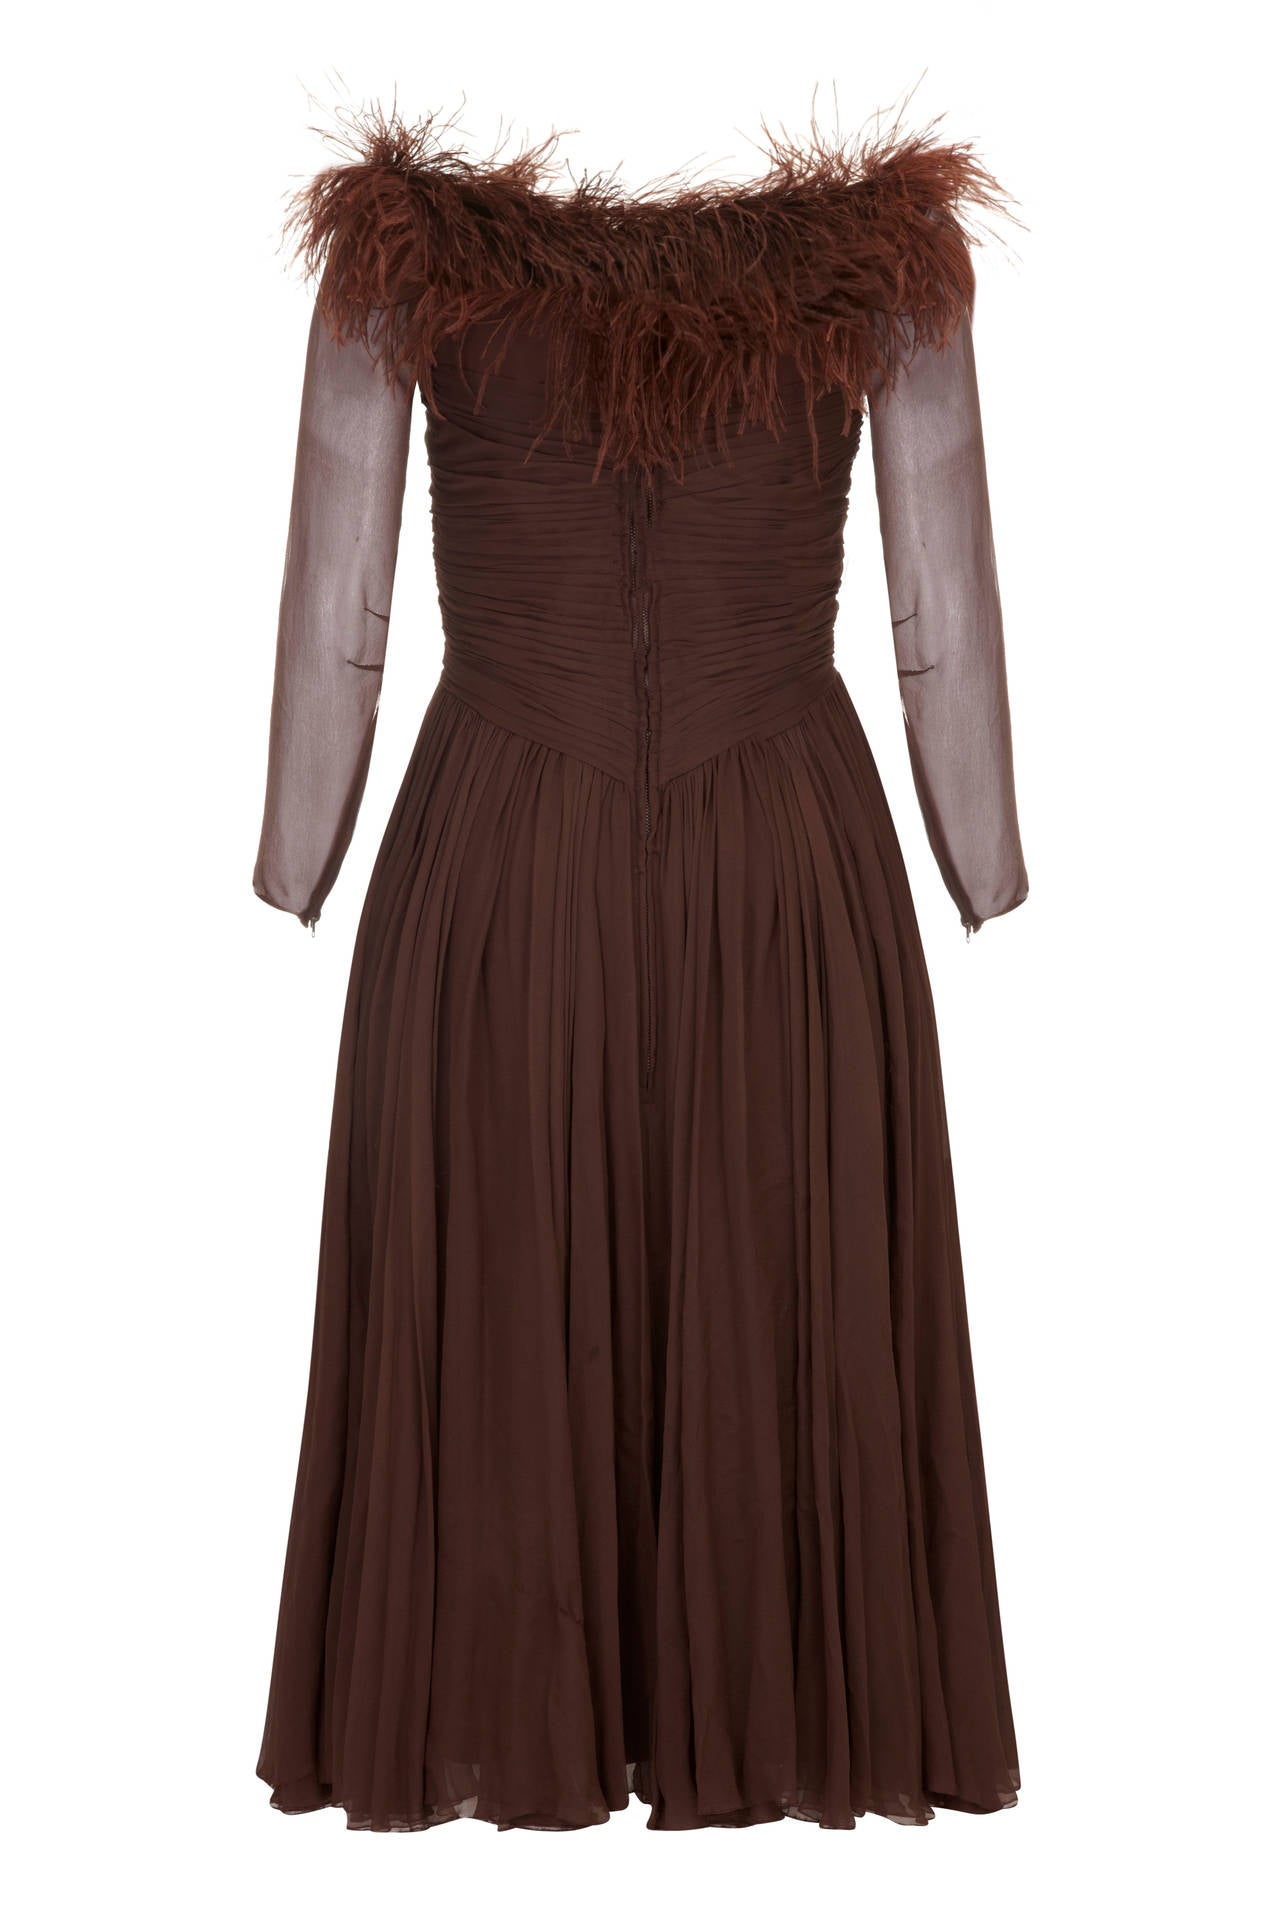 This gorgeous chestnut brown silk chiffon dress is from American boutique label Cardinal. The chiffon bodice is gathered into pleats with tiny covered buttons down the centre front and the sheer 3/4/ length sleeves taper at the wrists with zipper